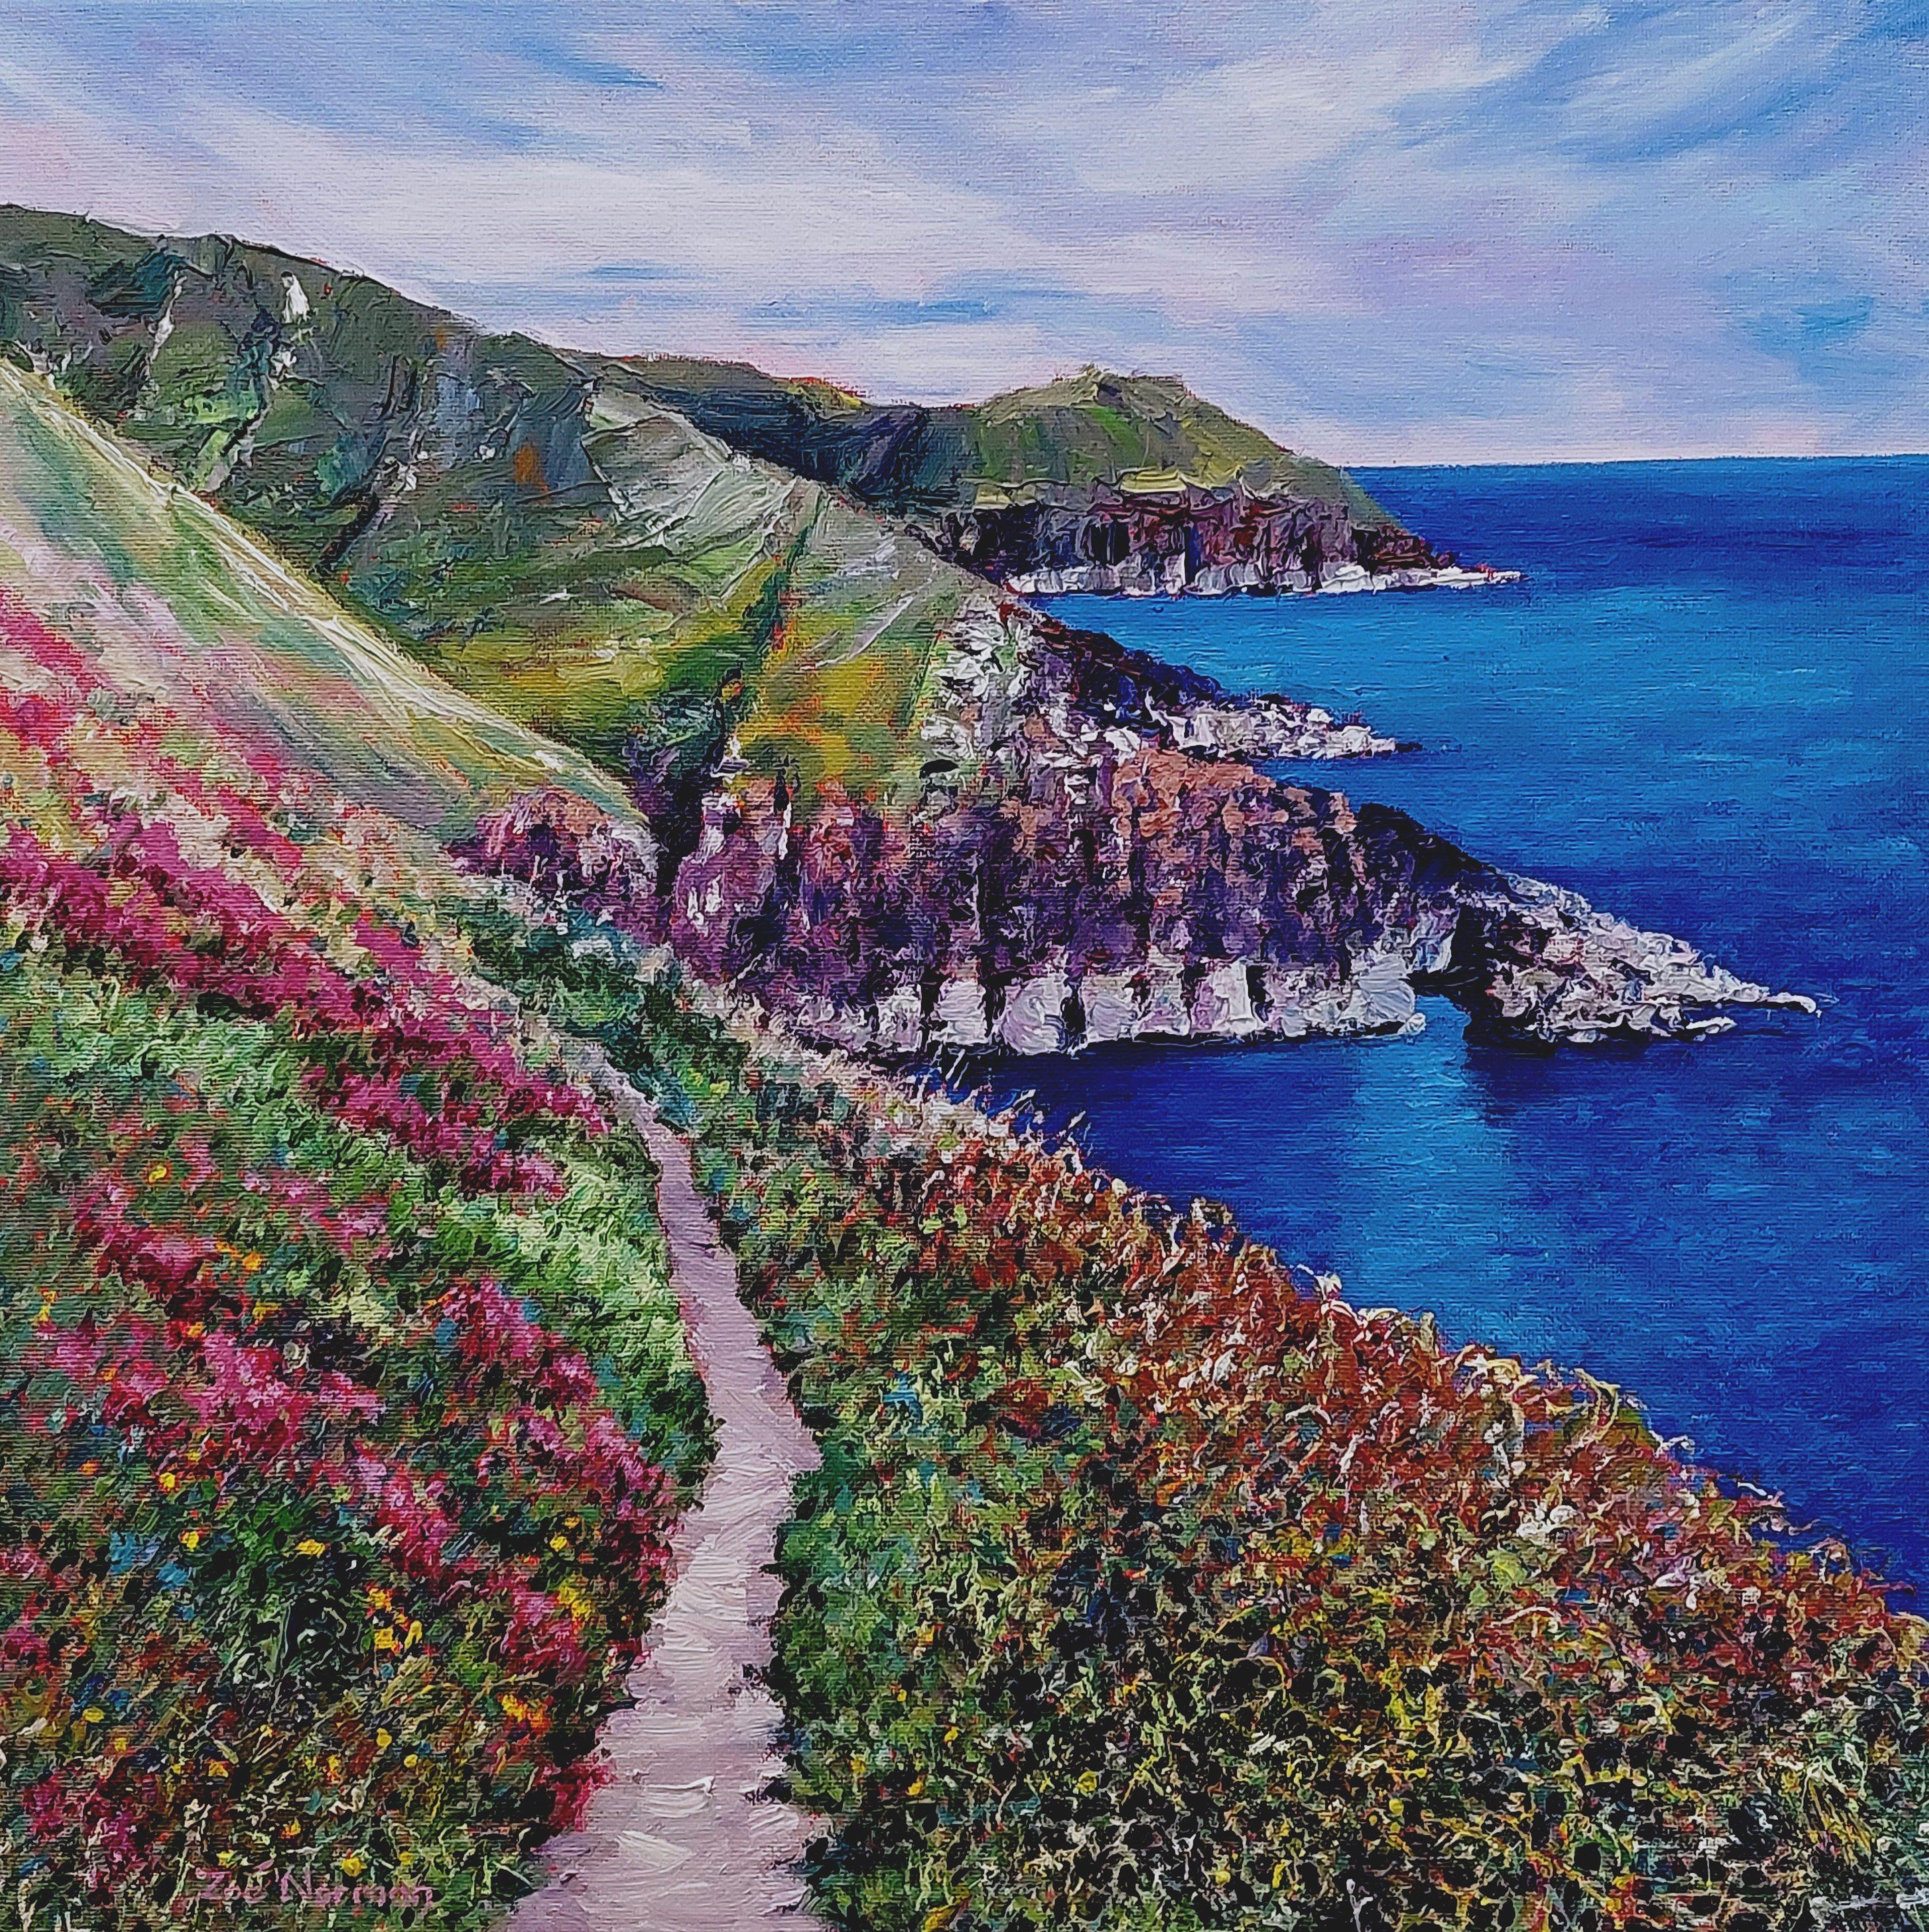 Contemporary Impressionism. This is the Gower coastal path from Rhossili to Worms Head near Swansea. I captured the scene on a very hot September day whilst on holiday and completed the painting back home in my studio. The painting continues around